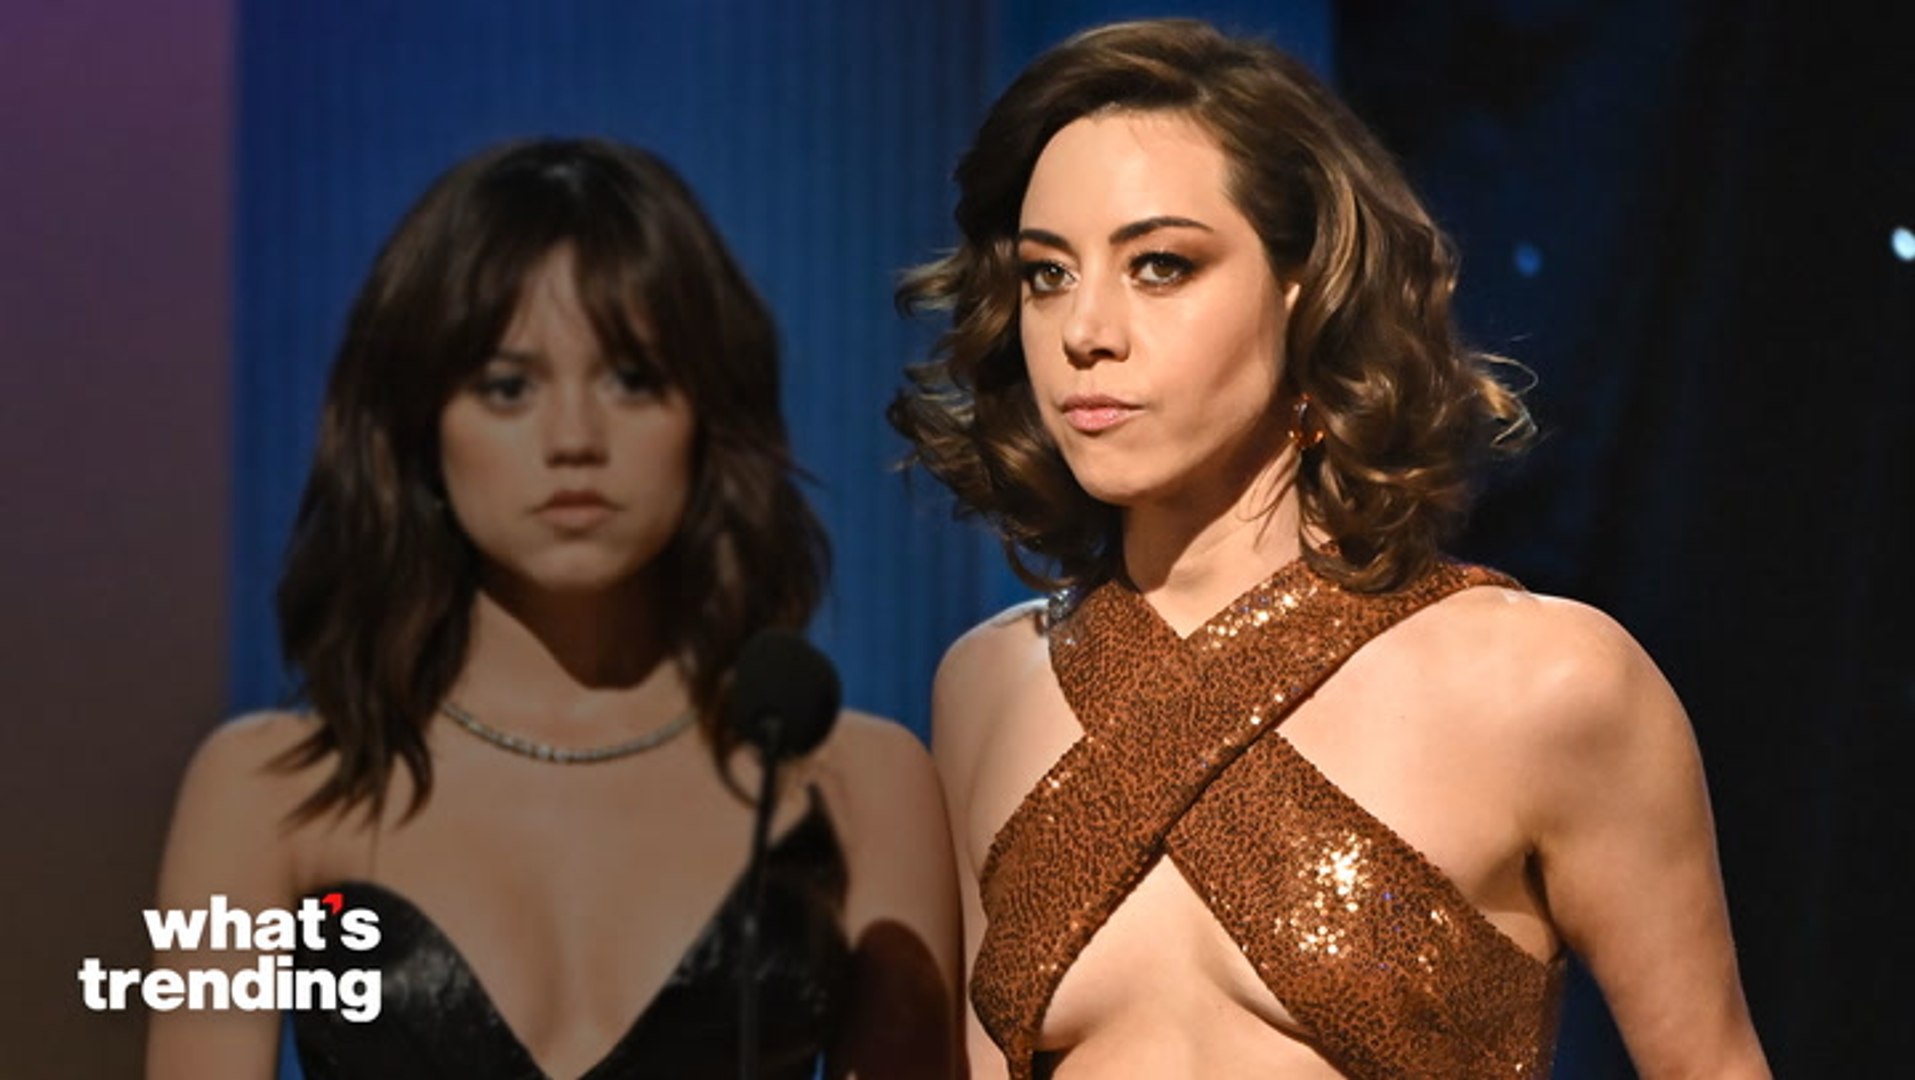 Aubrey Plaza fans react to her 'annoyed' glance on stage at SAG Awards -  Mirror Online